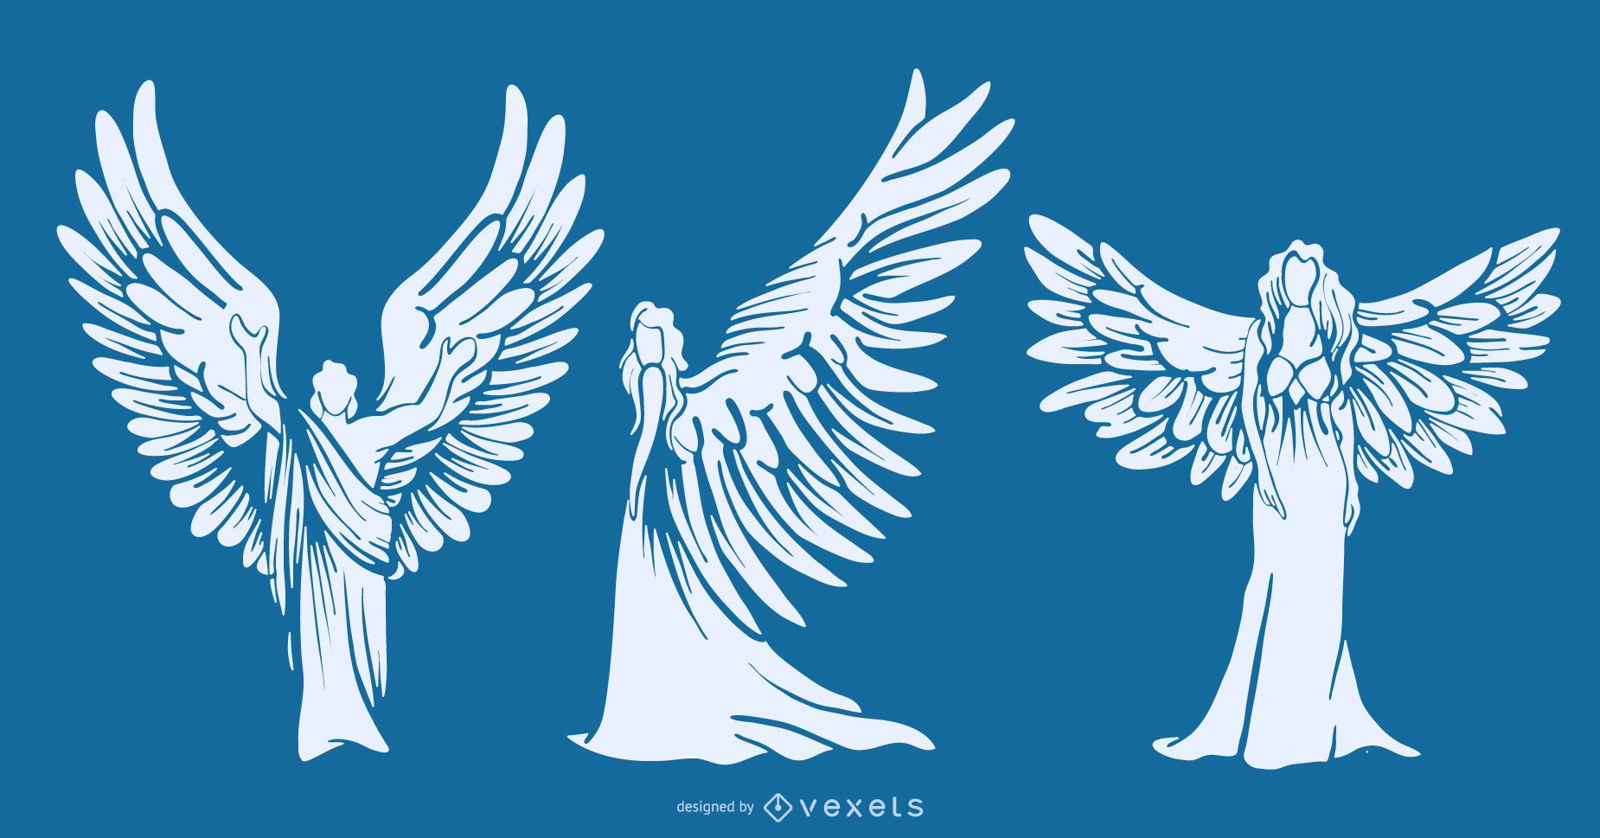 Download Winged Angels Silhouettes Set - Vector Download